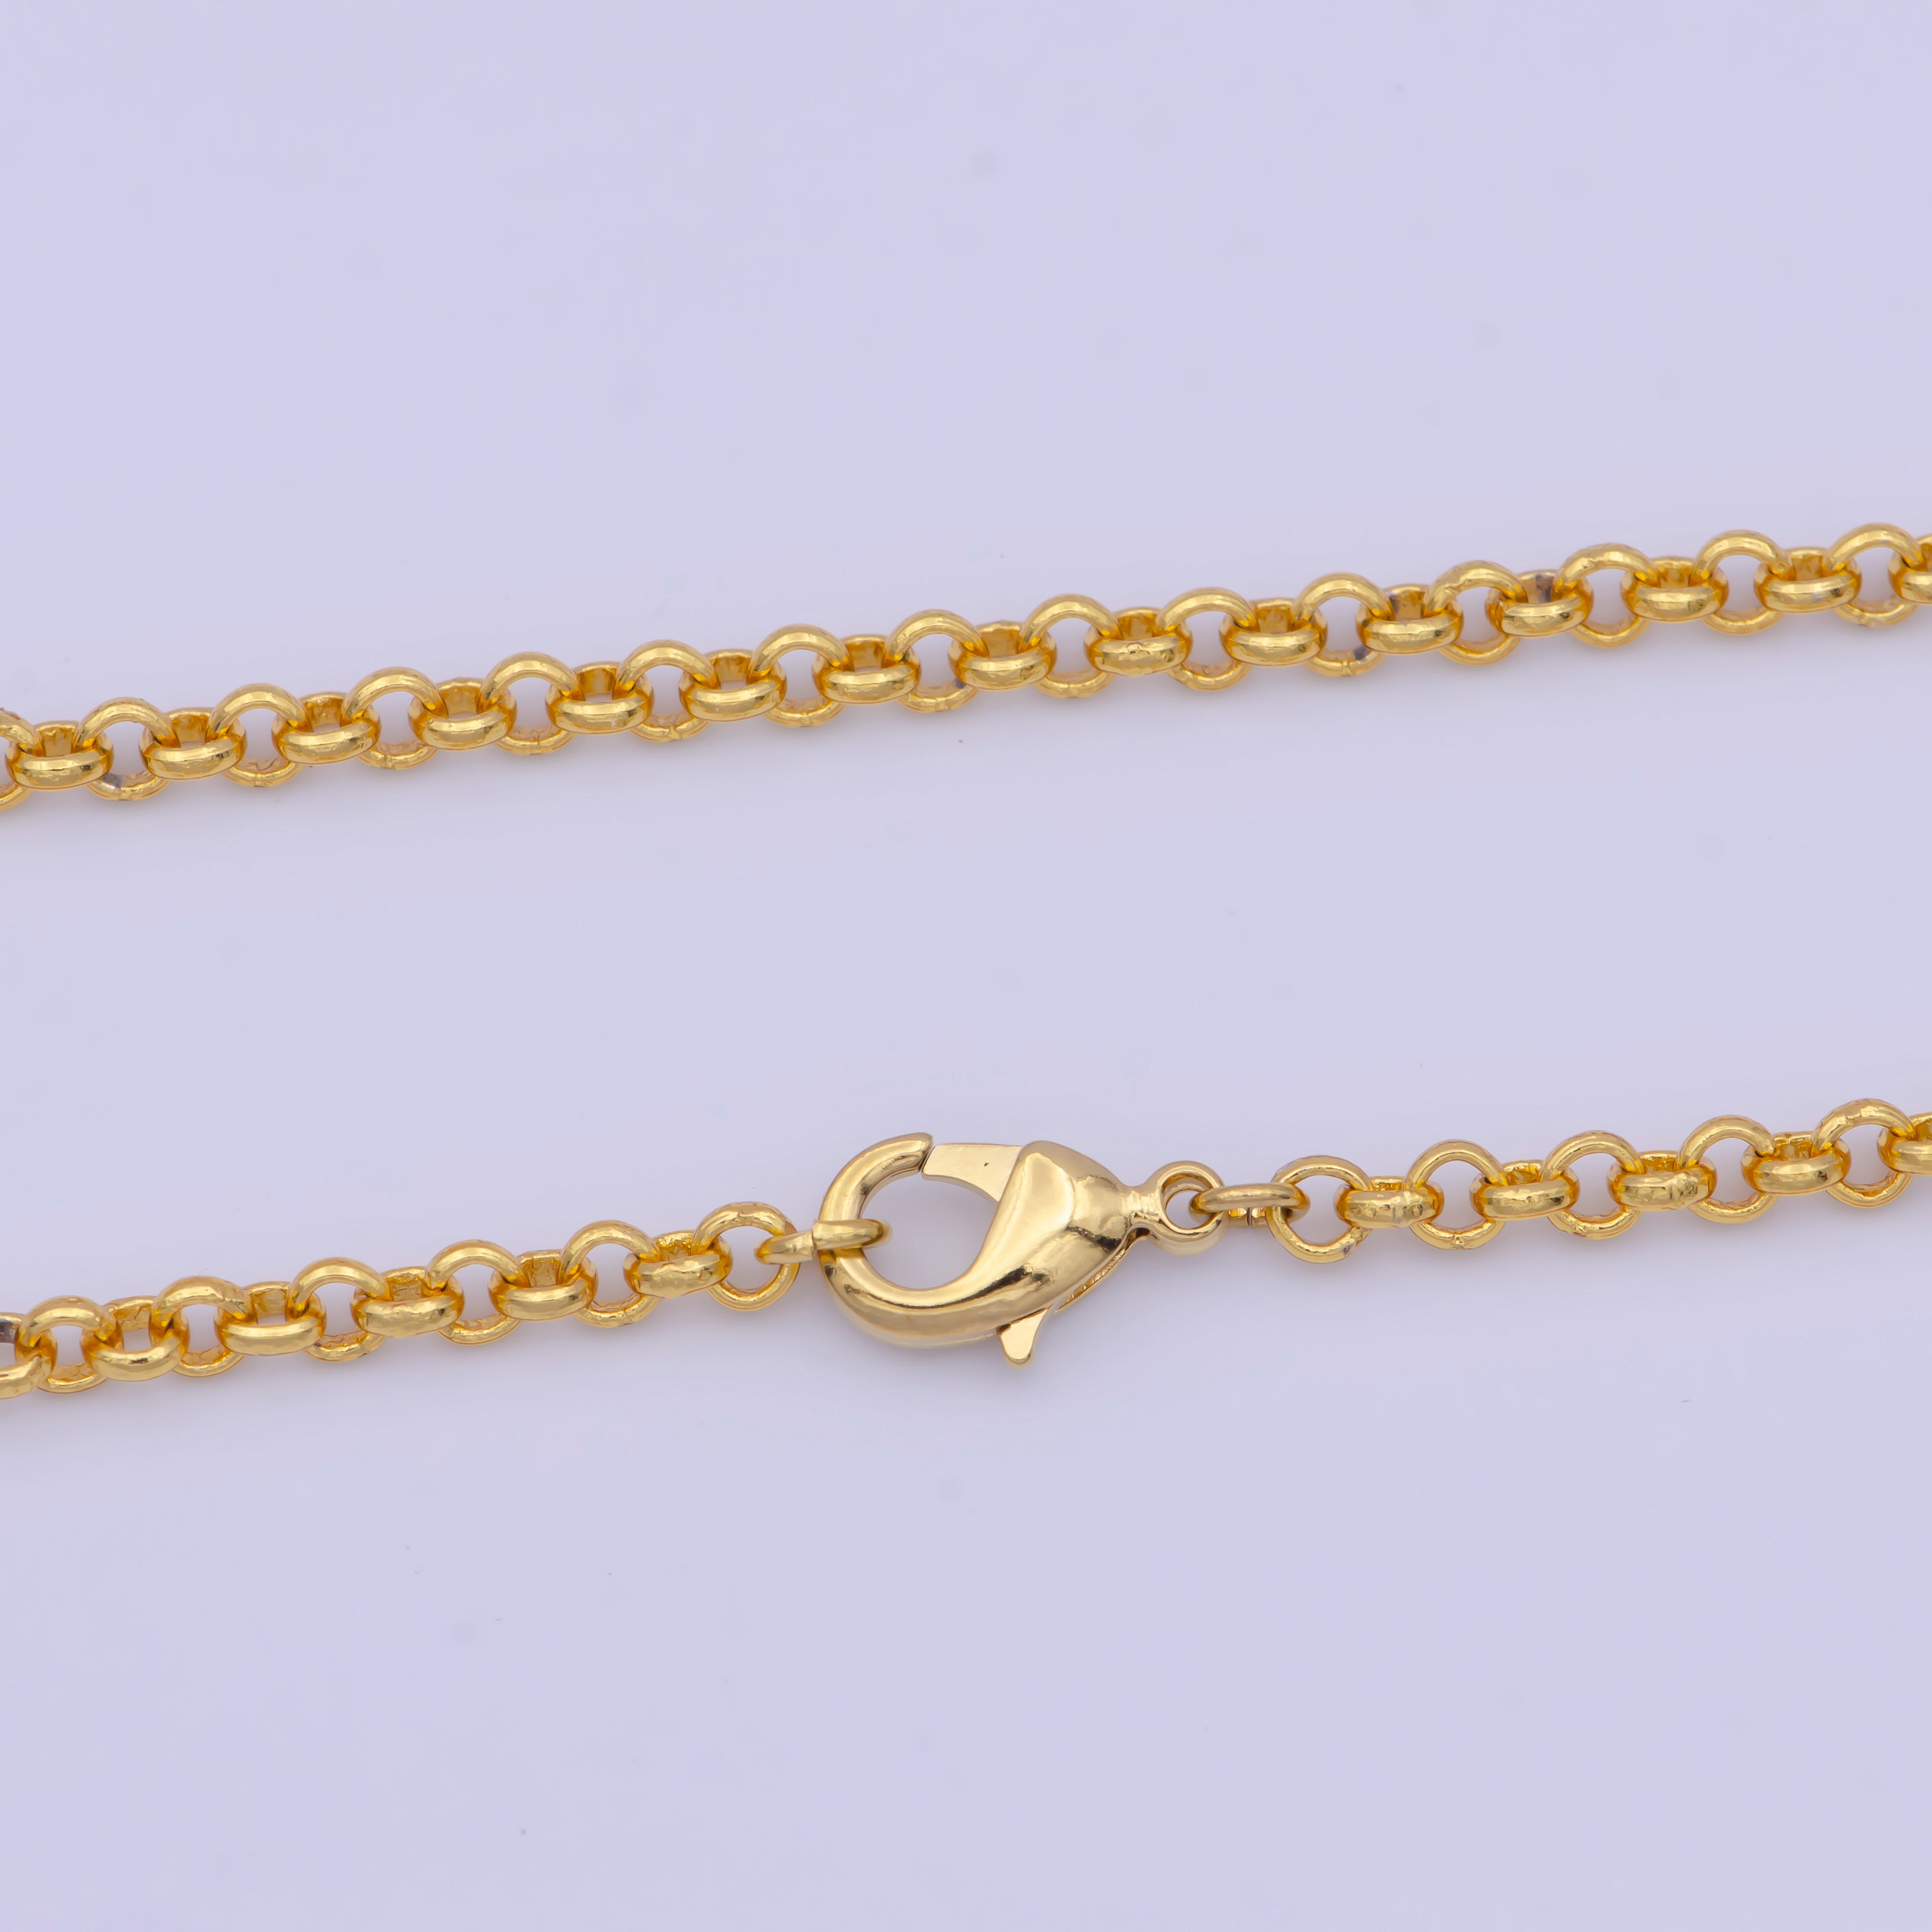 Dainty 24K Gold Filled Rolo Chain Necklace Gold Link Chain Necklace Ready to Wear 17.5 Inch WA-1149 - DLUXCA